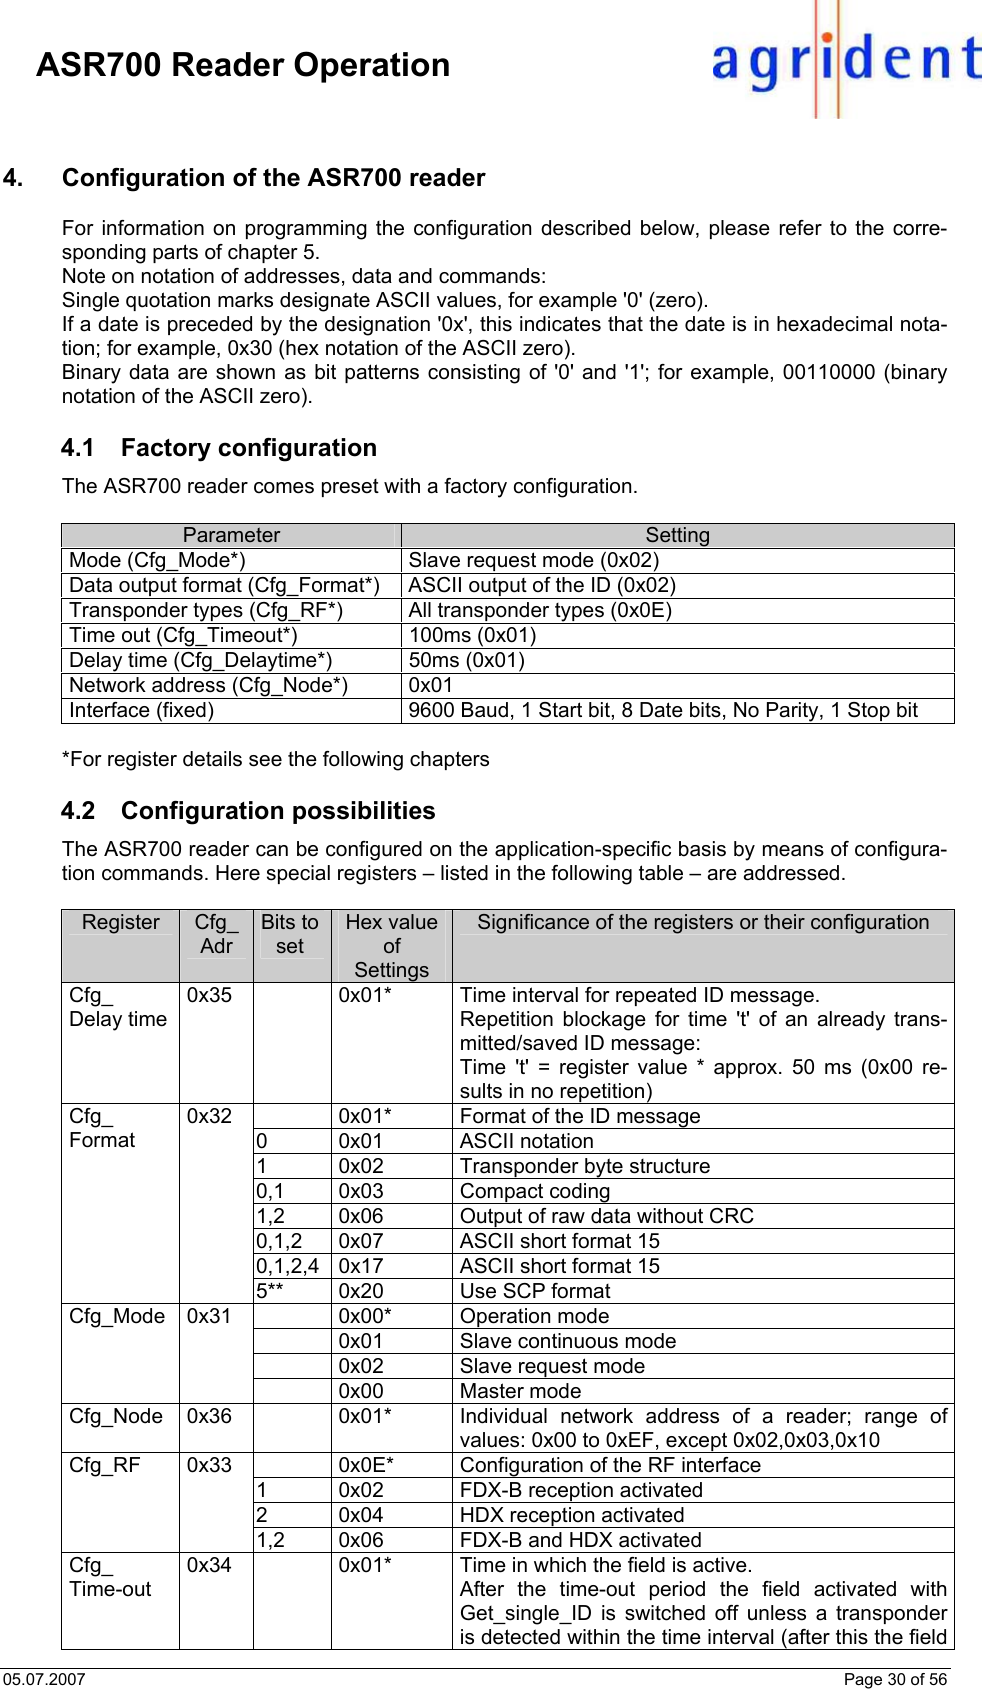 05.07.2007    Page 30 of 56     ASR700 Reader Operation 4.  Configuration of the ASR700 reader For information on programming the configuration described below, please refer to the corre-sponding parts of chapter 5. Note on notation of addresses, data and commands: Single quotation marks designate ASCII values, for example &apos;0&apos; (zero). If a date is preceded by the designation &apos;0x&apos;, this indicates that the date is in hexadecimal nota-tion; for example, 0x30 (hex notation of the ASCII zero). Binary data are shown as bit patterns consisting of &apos;0&apos; and &apos;1&apos;; for example, 00110000 (binary notation of the ASCII zero).   4.1 Factory configuration The ASR700 reader comes preset with a factory configuration.  Parameter  Setting Mode (Cfg_Mode*)  Slave request mode (0x02) Data output format (Cfg_Format*)  ASCII output of the ID (0x02) Transponder types (Cfg_RF*)  All transponder types (0x0E) Time out (Cfg_Timeout*)  100ms (0x01) Delay time (Cfg_Delaytime*)  50ms (0x01) Network address (Cfg_Node*)  0x01 Interface (fixed)  9600 Baud, 1 Start bit, 8 Date bits, No Parity, 1 Stop bit  *For register details see the following chapters  4.2 Configuration possibilities The ASR700 reader can be configured on the application-specific basis by means of configura-tion commands. Here special registers – listed in the following table – are addressed.  Register  Cfg_ Adr Bits to set Hex value of Settings Significance of the registers or their configuration Cfg_ Delay time 0x35    0x01*  Time interval for repeated ID message. Repetition blockage for time &apos;t&apos; of an already trans-mitted/saved ID message: Time &apos;t&apos; = register value * approx. 50 ms (0x00 re-sults in no repetition)   0x01*  Format of the ID message 0 0x01  ASCII notation 1  0x02  Transponder byte structure 0,1 0x03  Compact coding 1,2 0x06  Output of raw data without CRC 0,1,2  0x07  ASCII short format 15 0,1,2,4  0x17  ASCII short format 15 Cfg_ Format 0x32 5**  0x20  Use SCP format  0x00* Operation mode   0x01  Slave continuous mode   0x02  Slave request mode Cfg_Mode 0x31  0x00 Master mode Cfg_Node 0x36   0x01*  Individual network address of a reader; range of values: 0x00 to 0xEF, except 0x02,0x03,0x10   0x0E*  Configuration of the RF interface 1  0x02  FDX-B reception activated 2  0x04  HDX reception activated Cfg_RF 0x33 1,2  0x06  FDX-B and HDX activated Cfg_ Time-out 0x34    0x01*  Time in which the field is active. After the time-out period the field activated with Get_single_ID is switched off unless a transponder is detected within the time interval (after this the field 